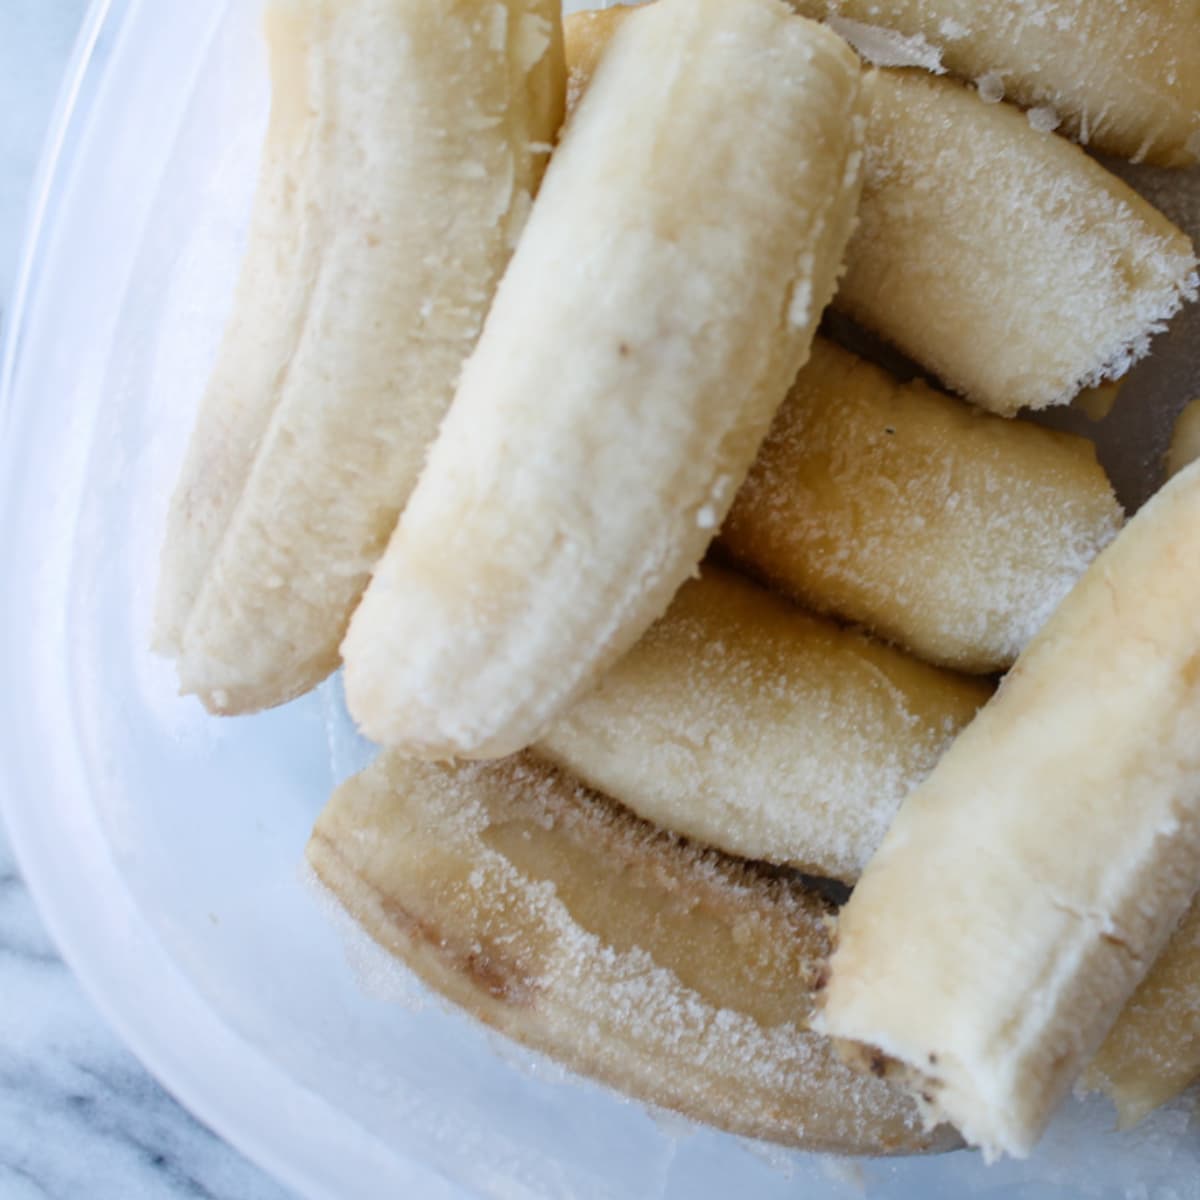 Frozen bananas in a container.